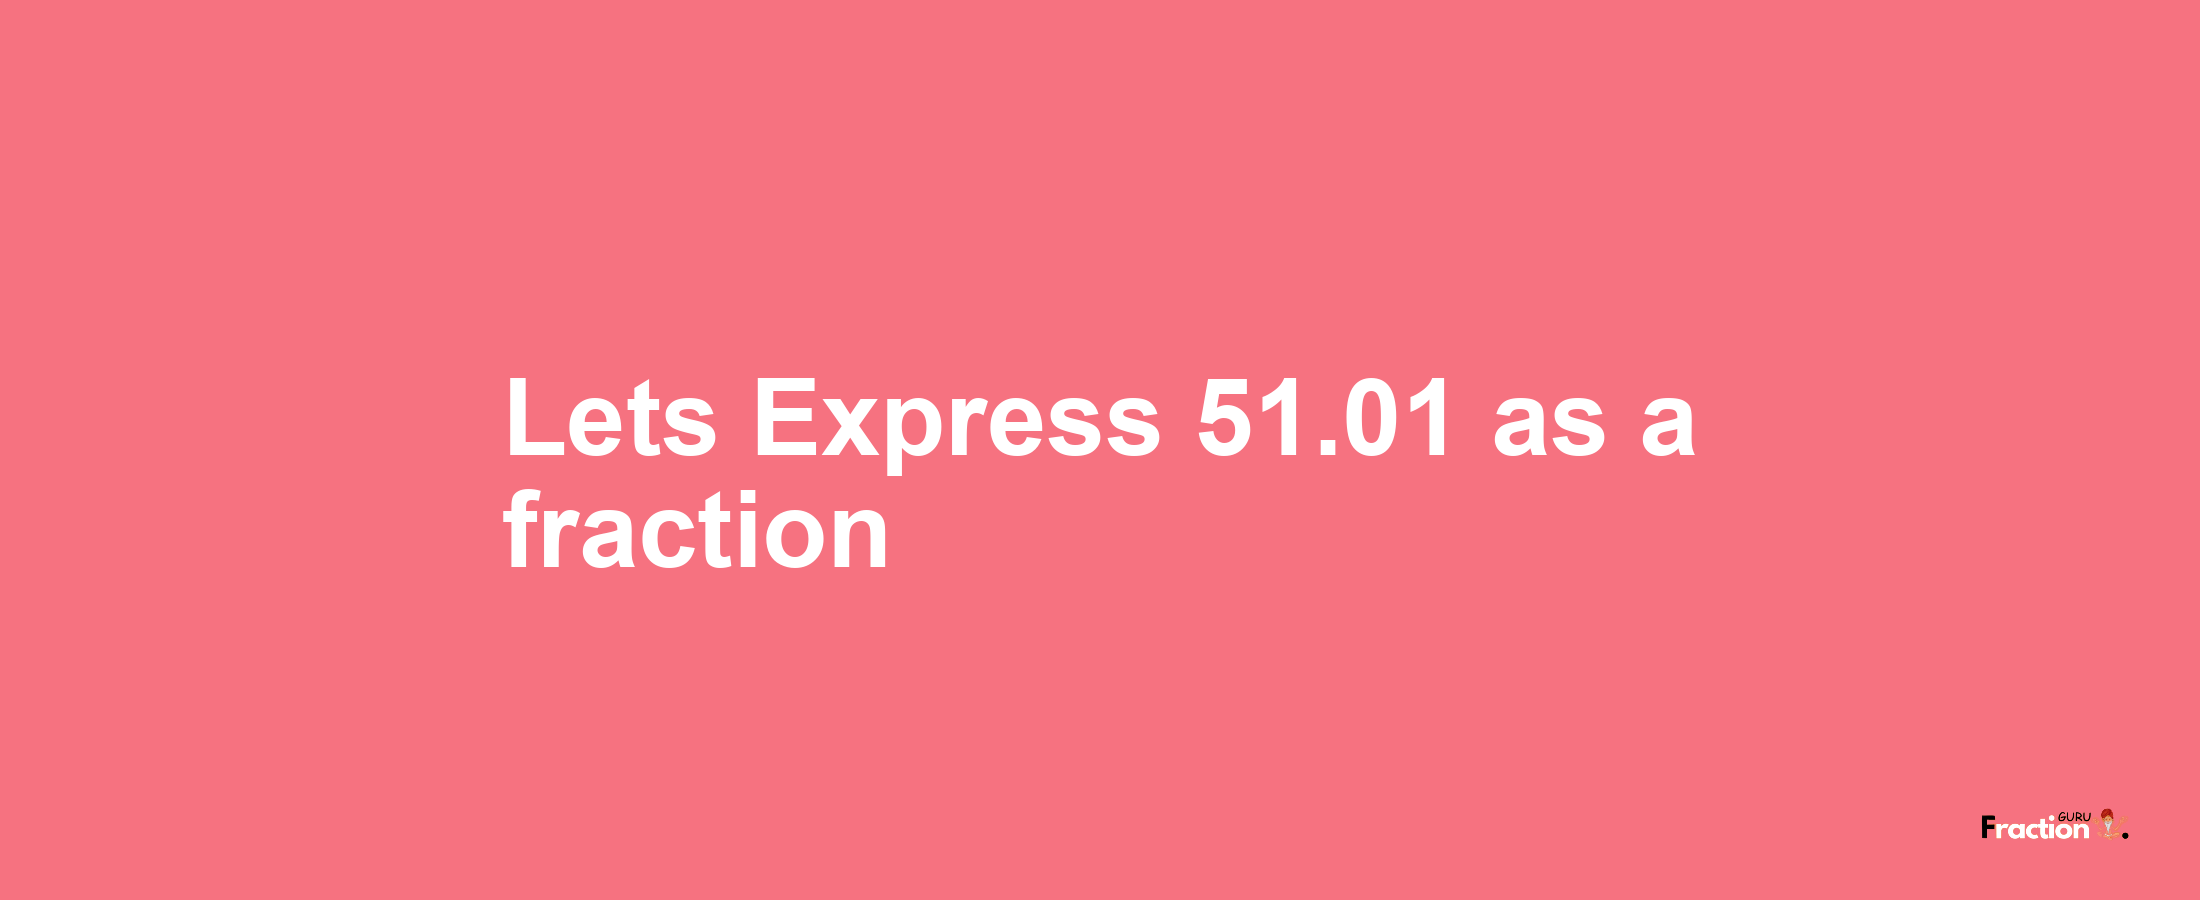 Lets Express 51.01 as afraction